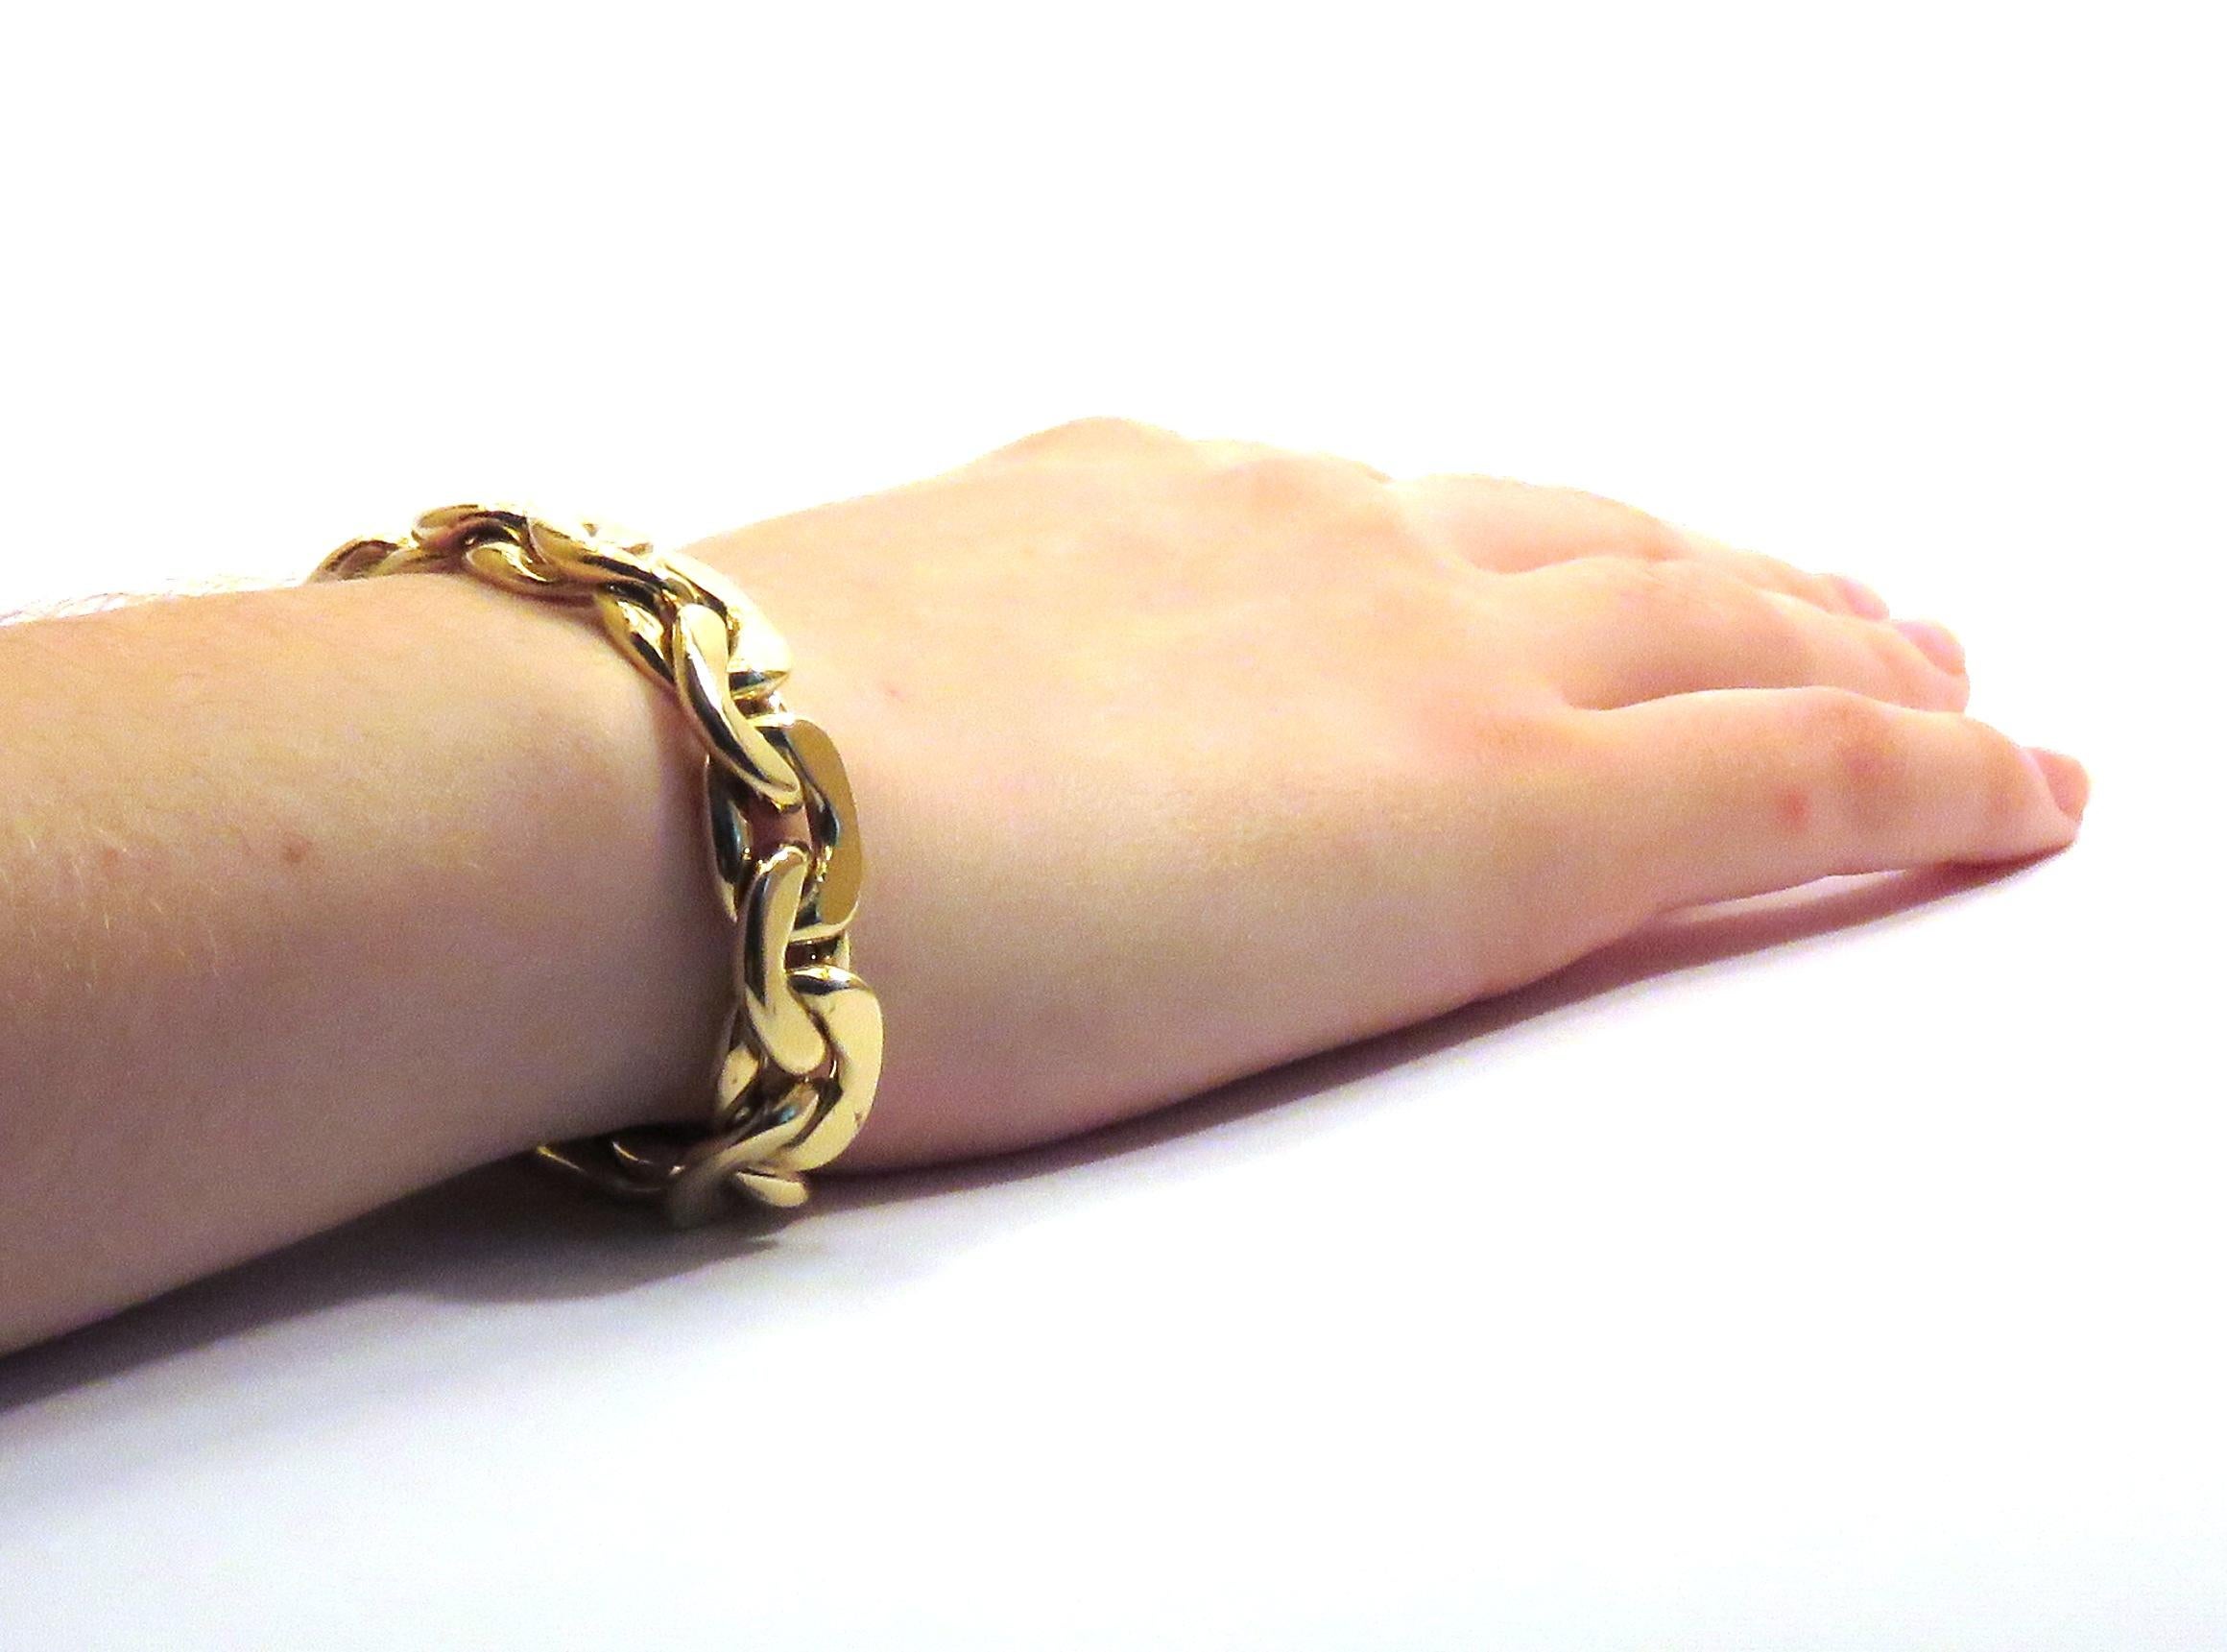 1980s classic groumette bracelet in 18k yellow gold 
This is the iconic collection made in Italy by Botta Gioielli
The total lengh is 19 cm/ 7.48 inches
The total weight of the gold is 33 grams/ 1.060 troy ounces.
It  is stamped with the Italian